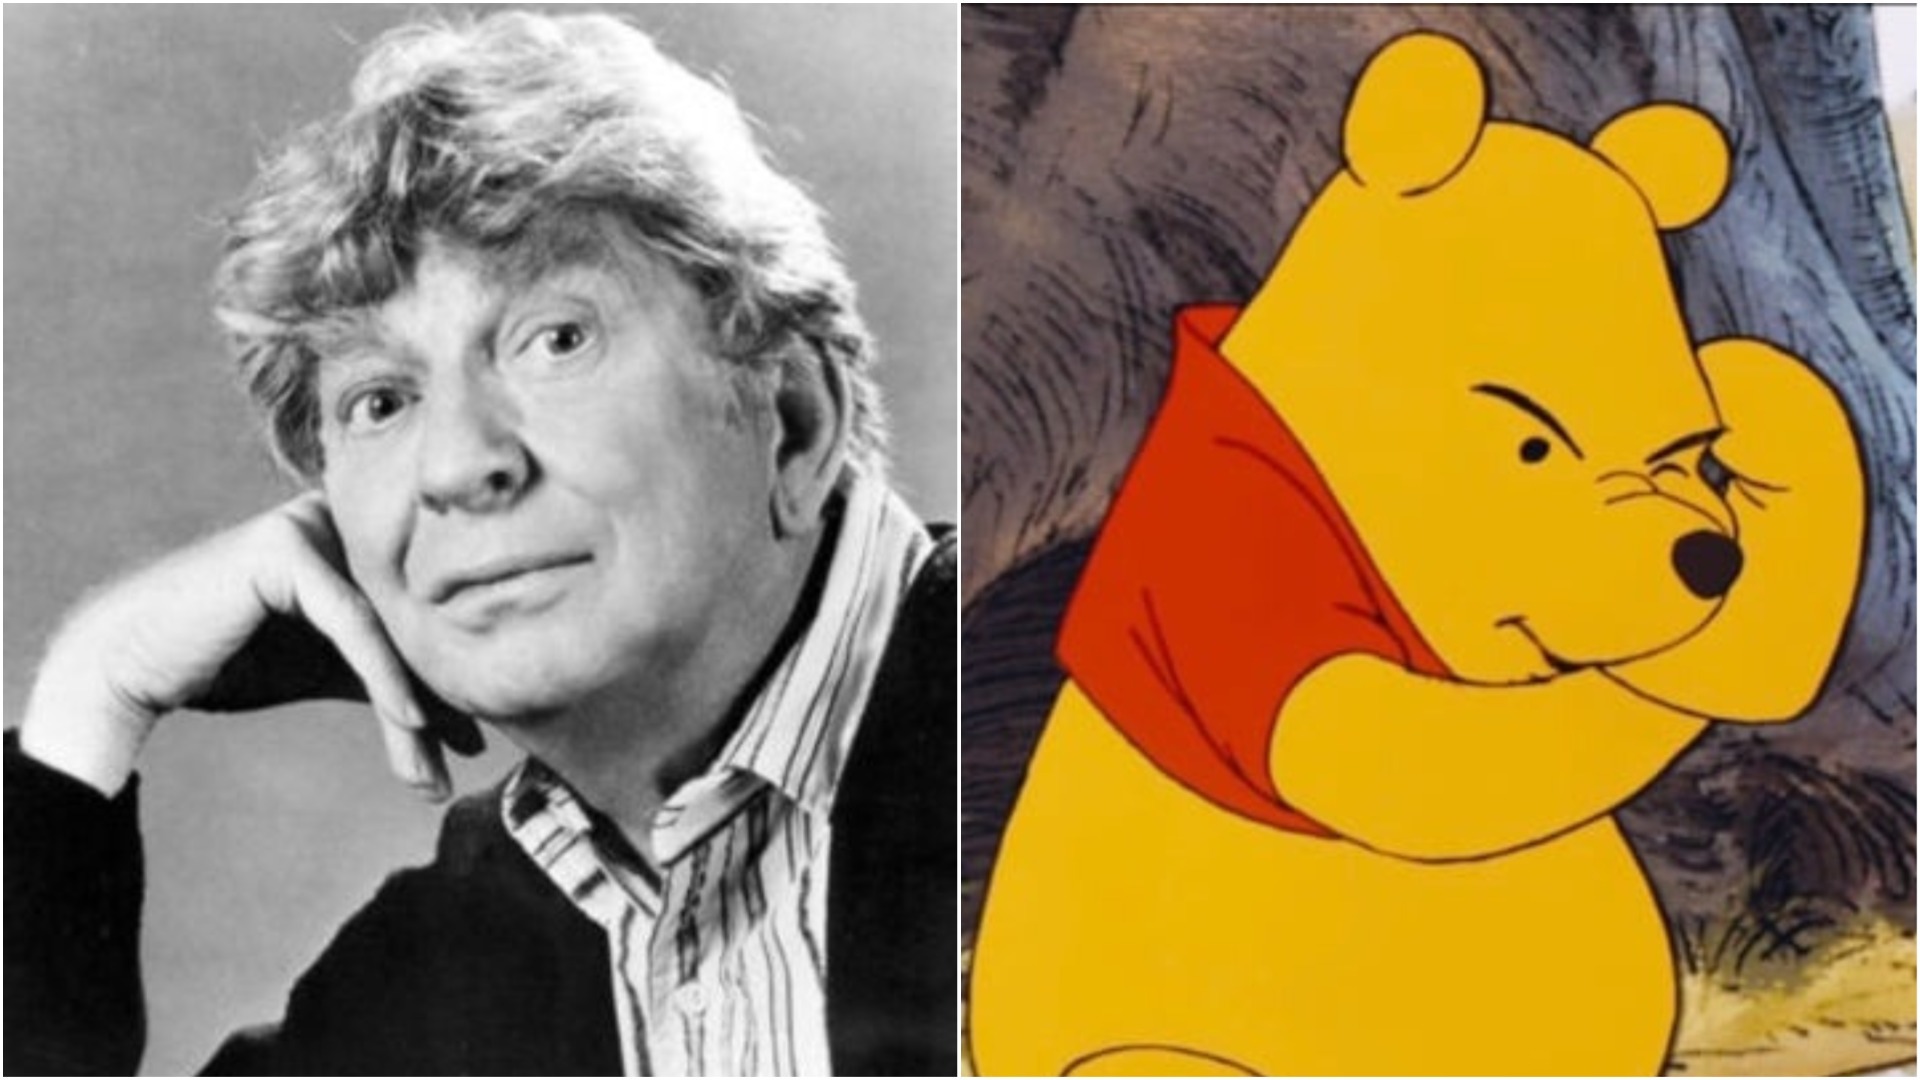 Here's What Happened to Disney's Original 'Winnie the Pooh' Voice Cast